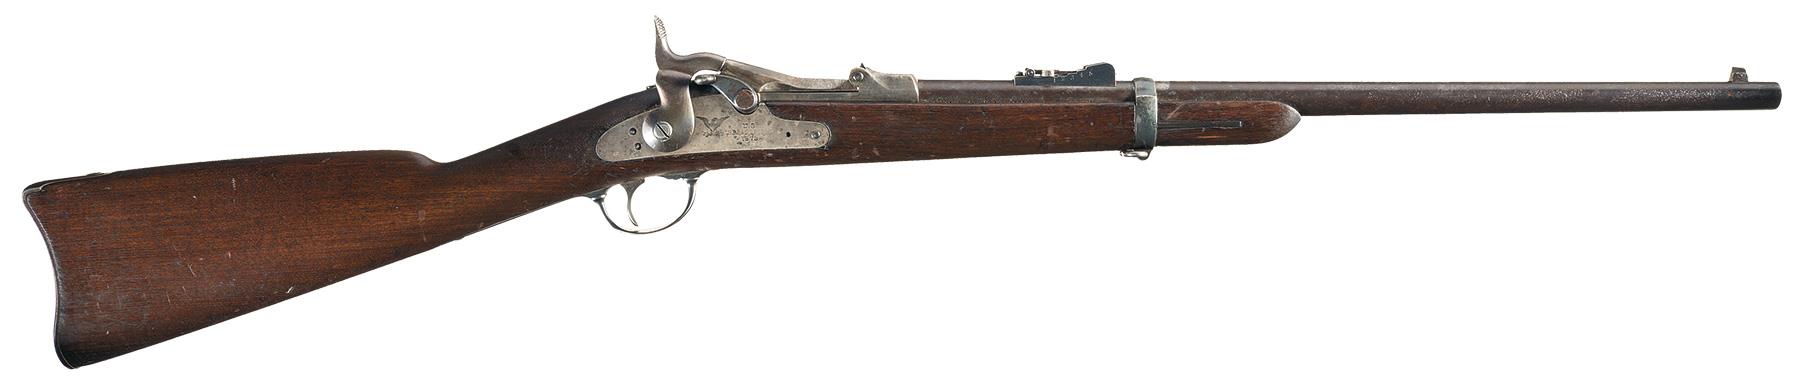 1873 springfield trapdoor with serial number 47978